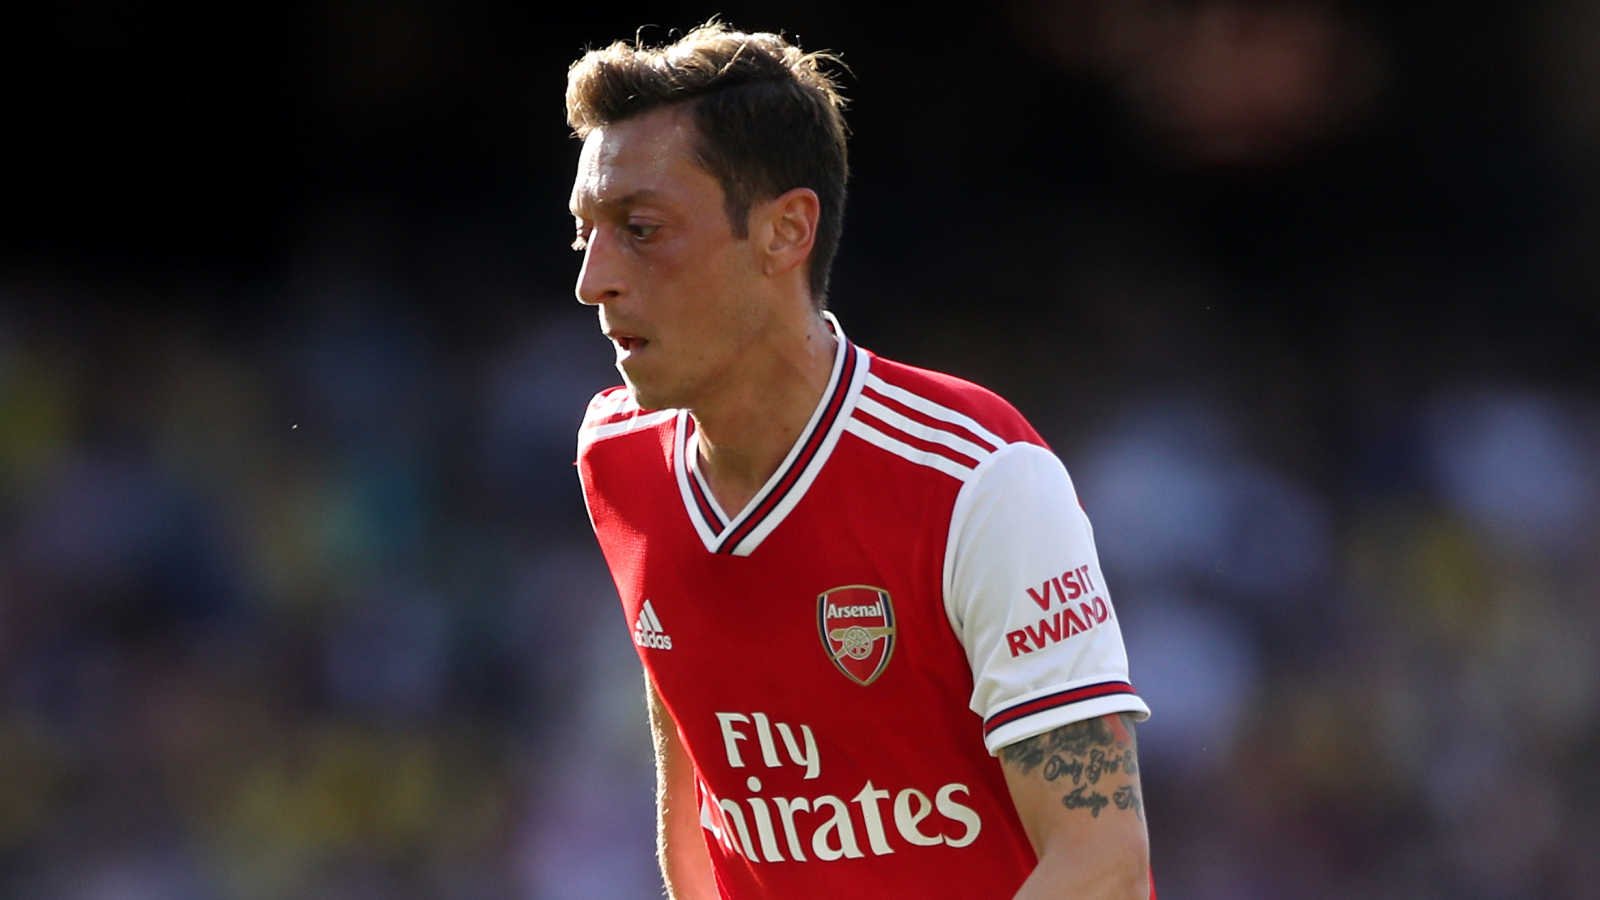 Mesut Ozil puts on a show as NBA legend visits Emirates to watch the Arsenal star in action against Man United